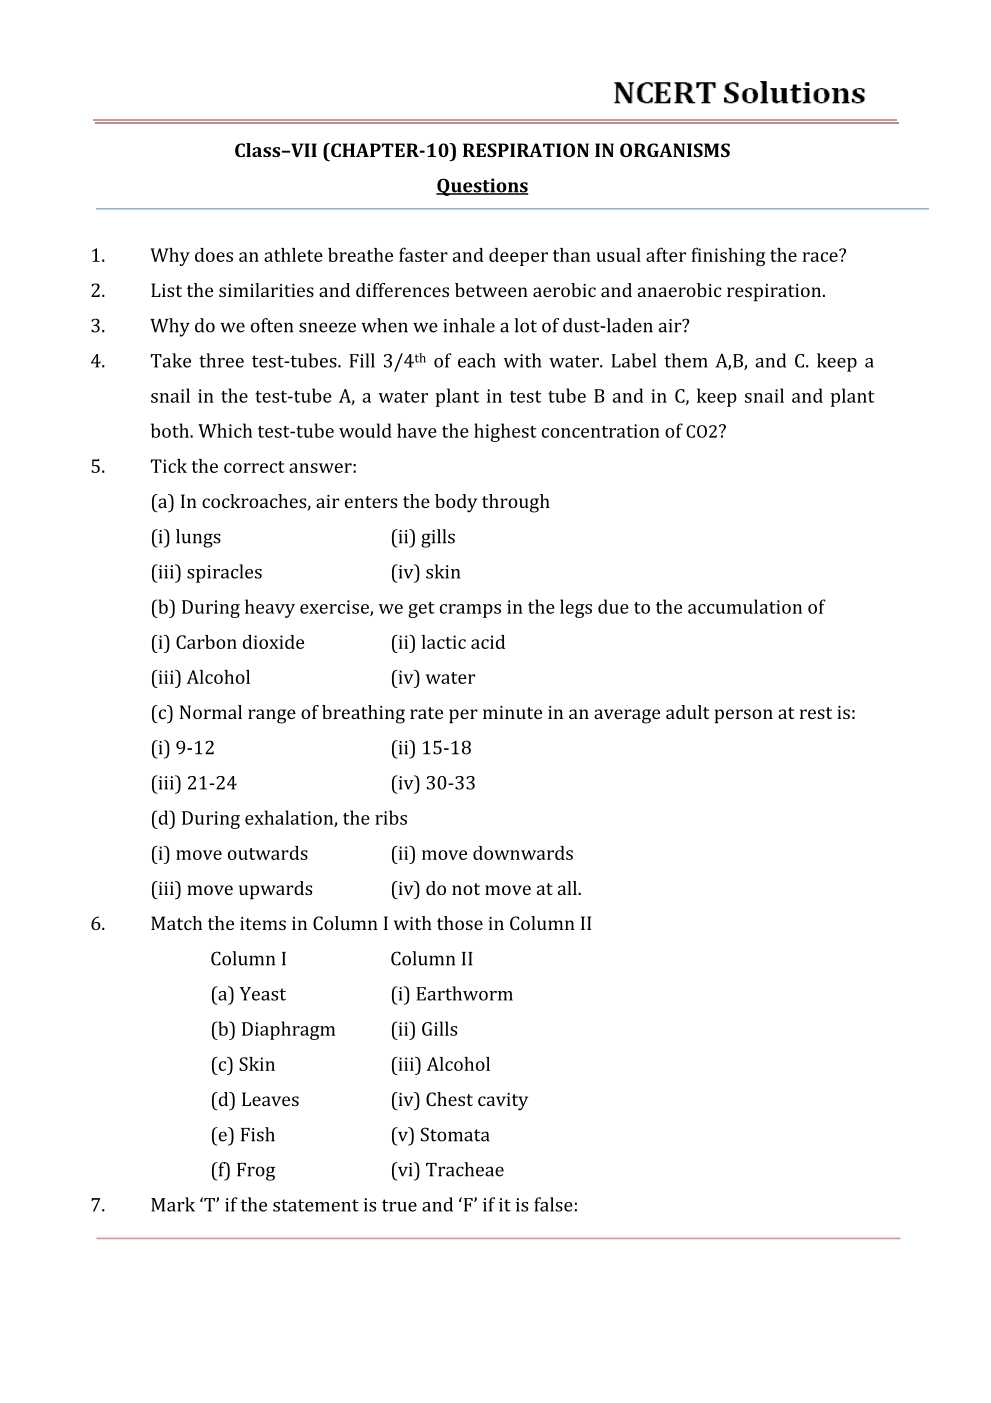 NCERT Solutions For Class 7 science Chapter 10 Respiration in Organisms